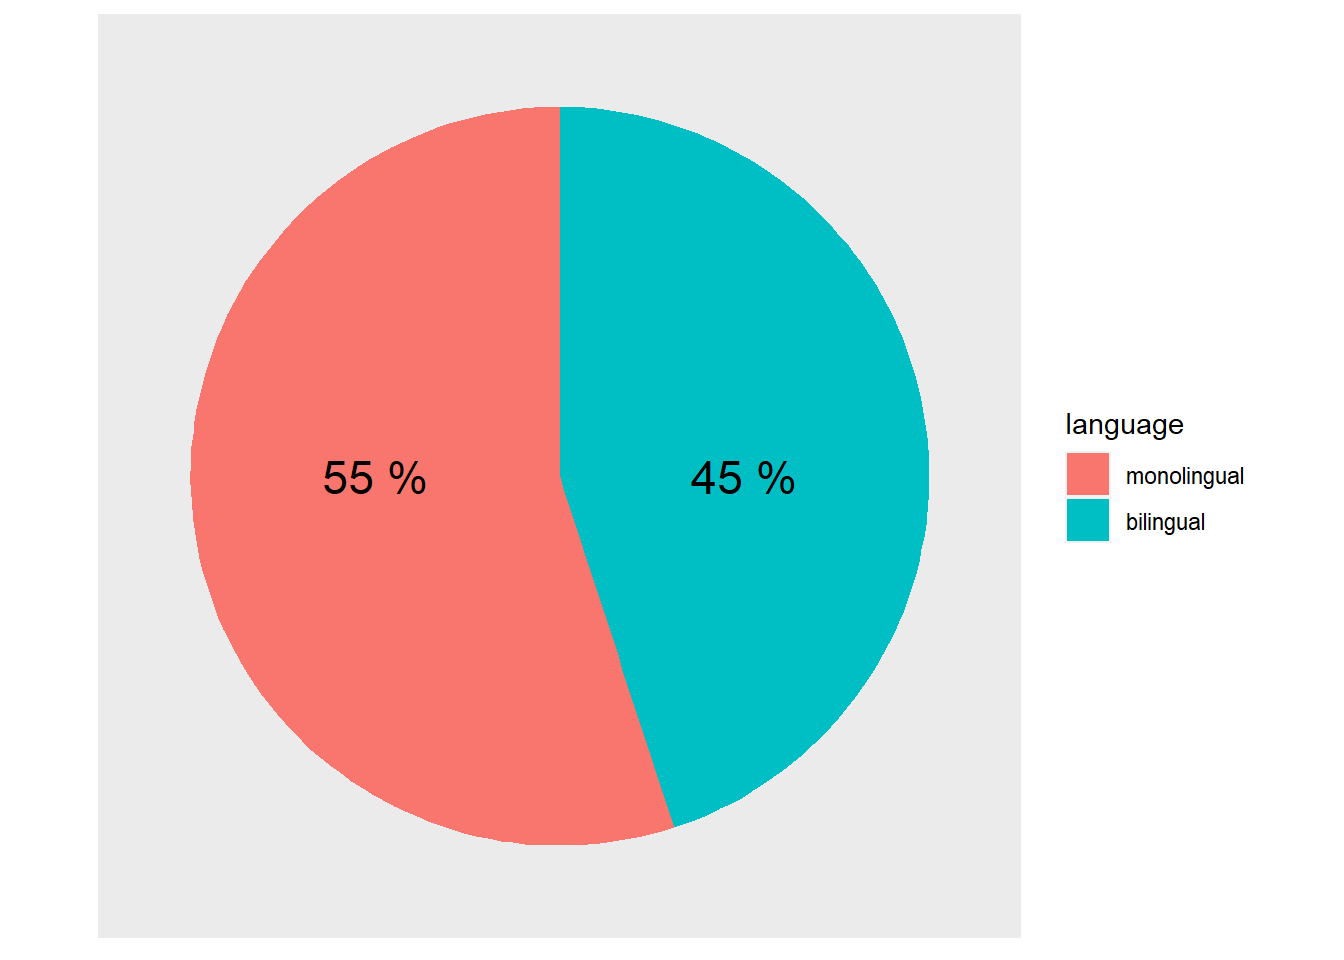 A pie chart of the demographics